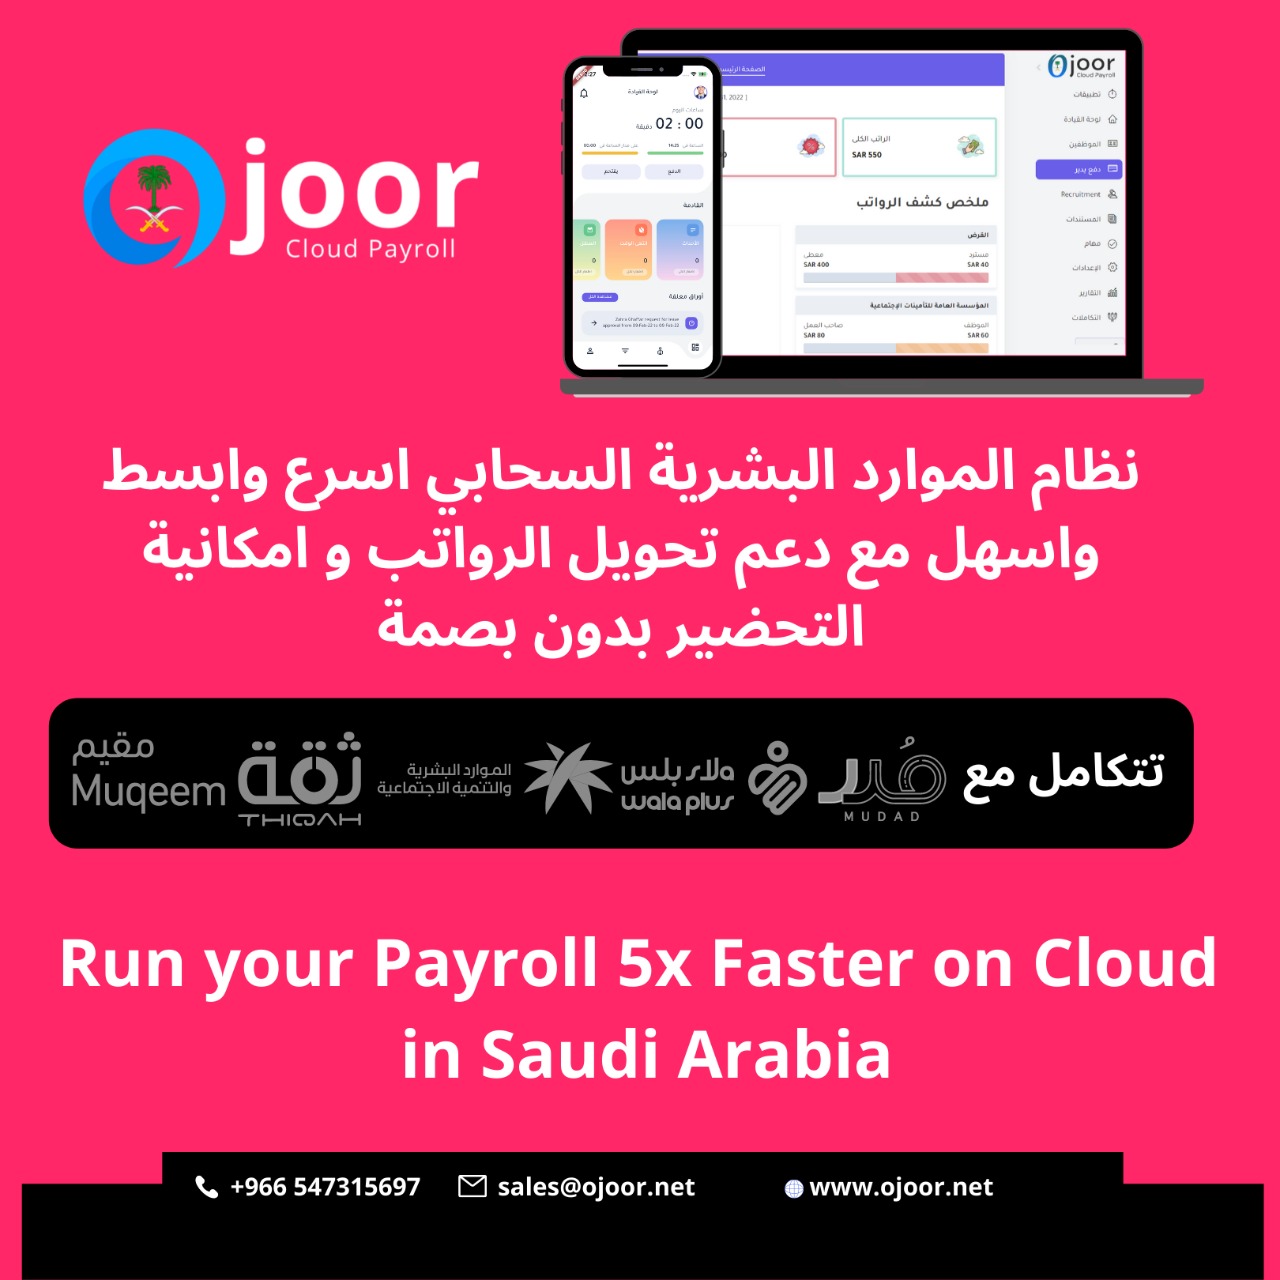 What are the key benefits of management in Payroll Software in Saudi?